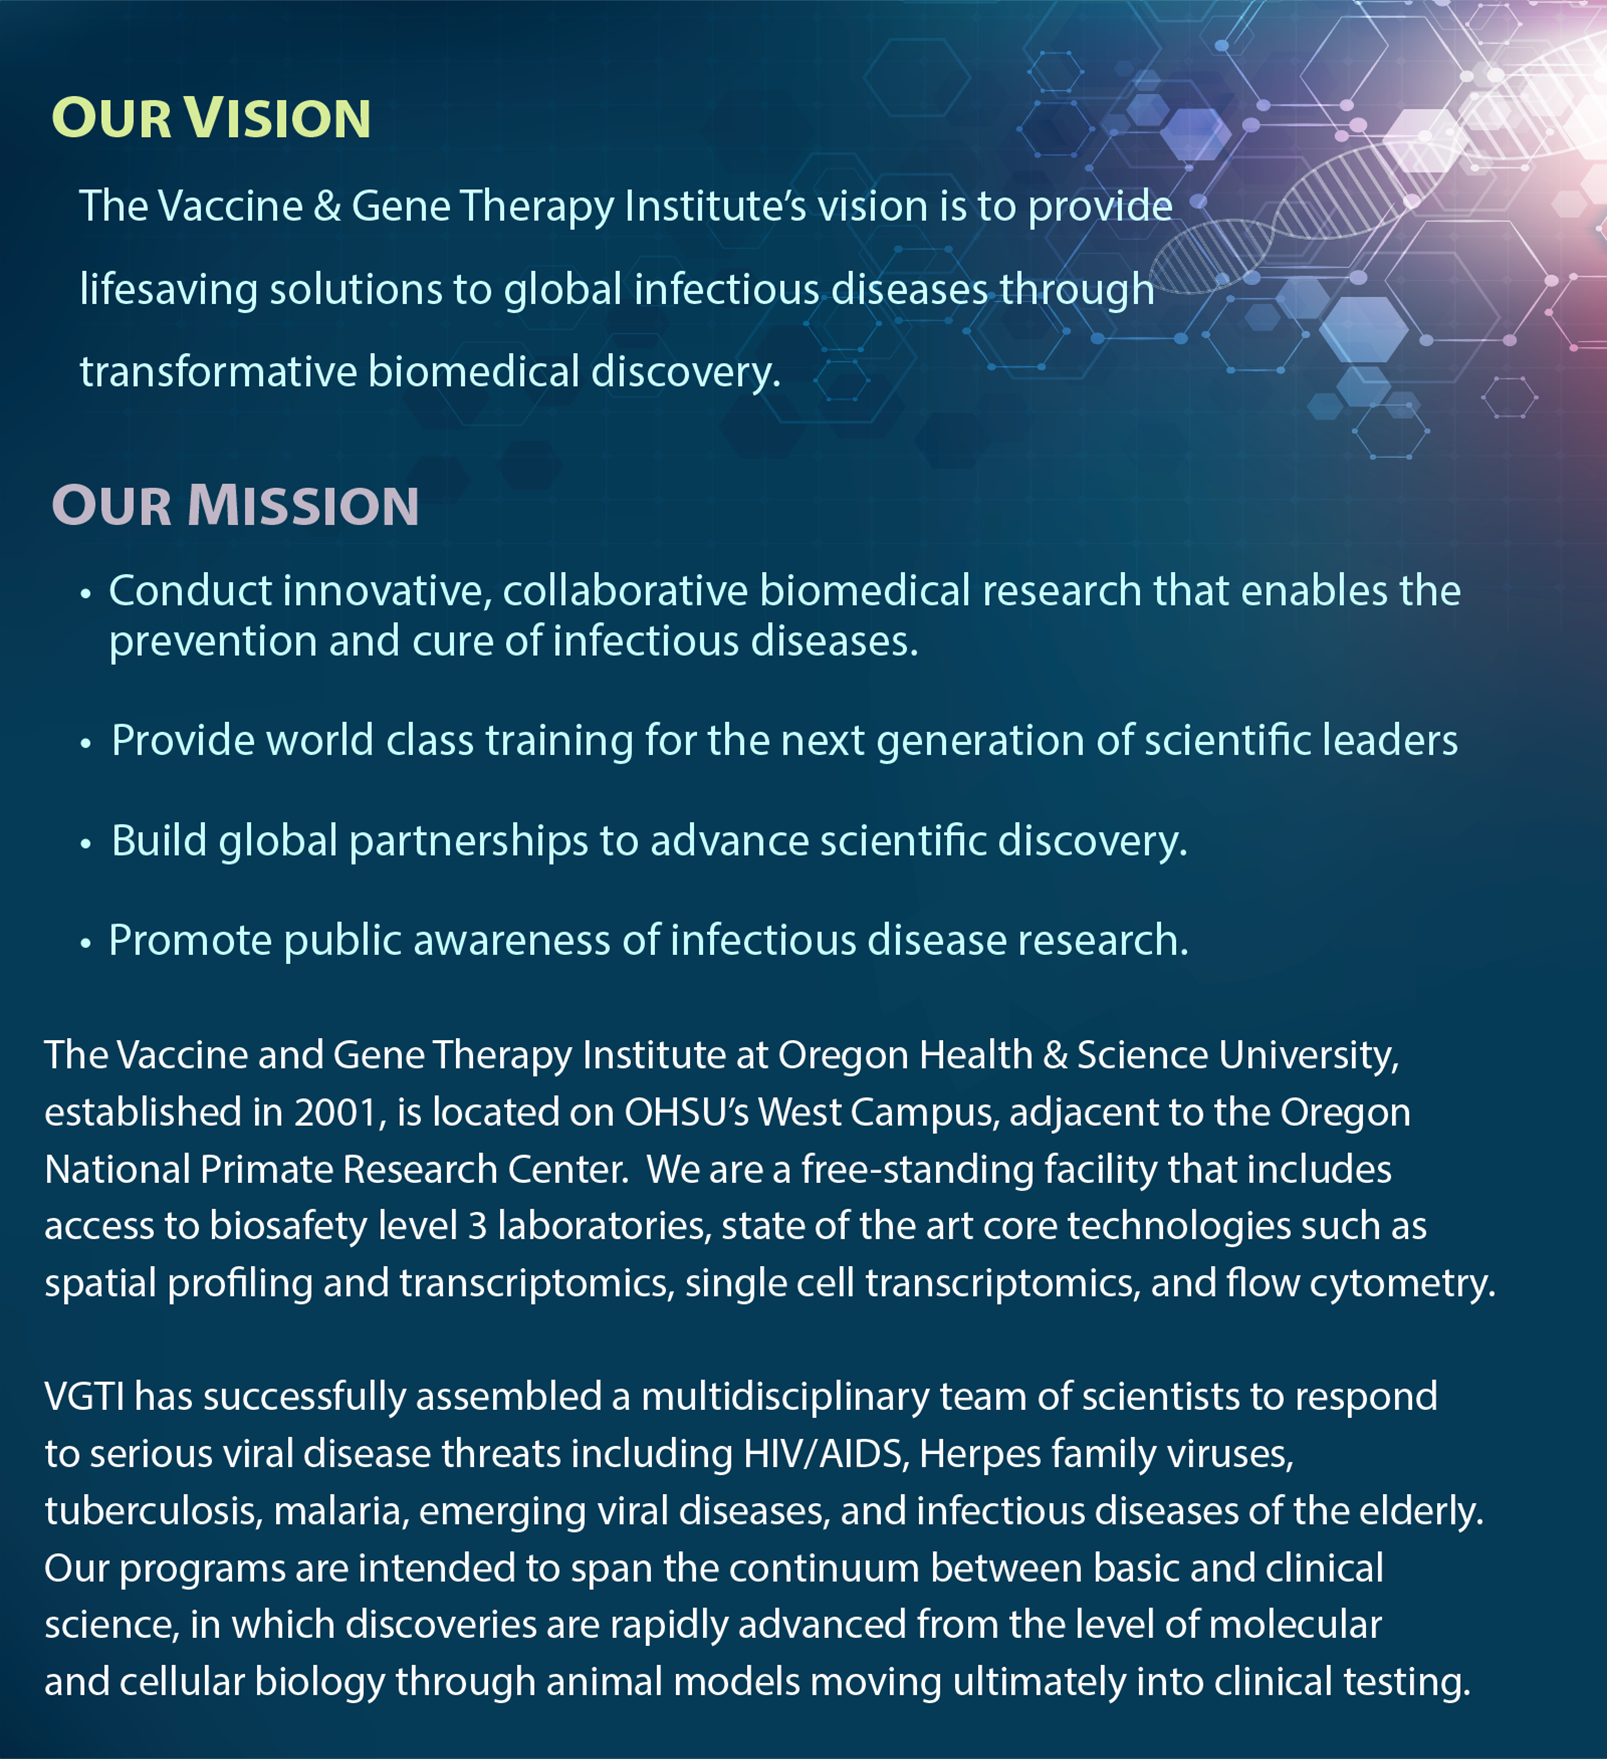 Our Mission_ •	Conduct innovative, collaborative biomedical research that enables 	the  	prevention and cure of infectious diseases.  •  Provide world class training for the next generation of scientific leaders  •  Build global partnerships to advance scientific discovery.  •	Promote public awareness of infectious disease research. 